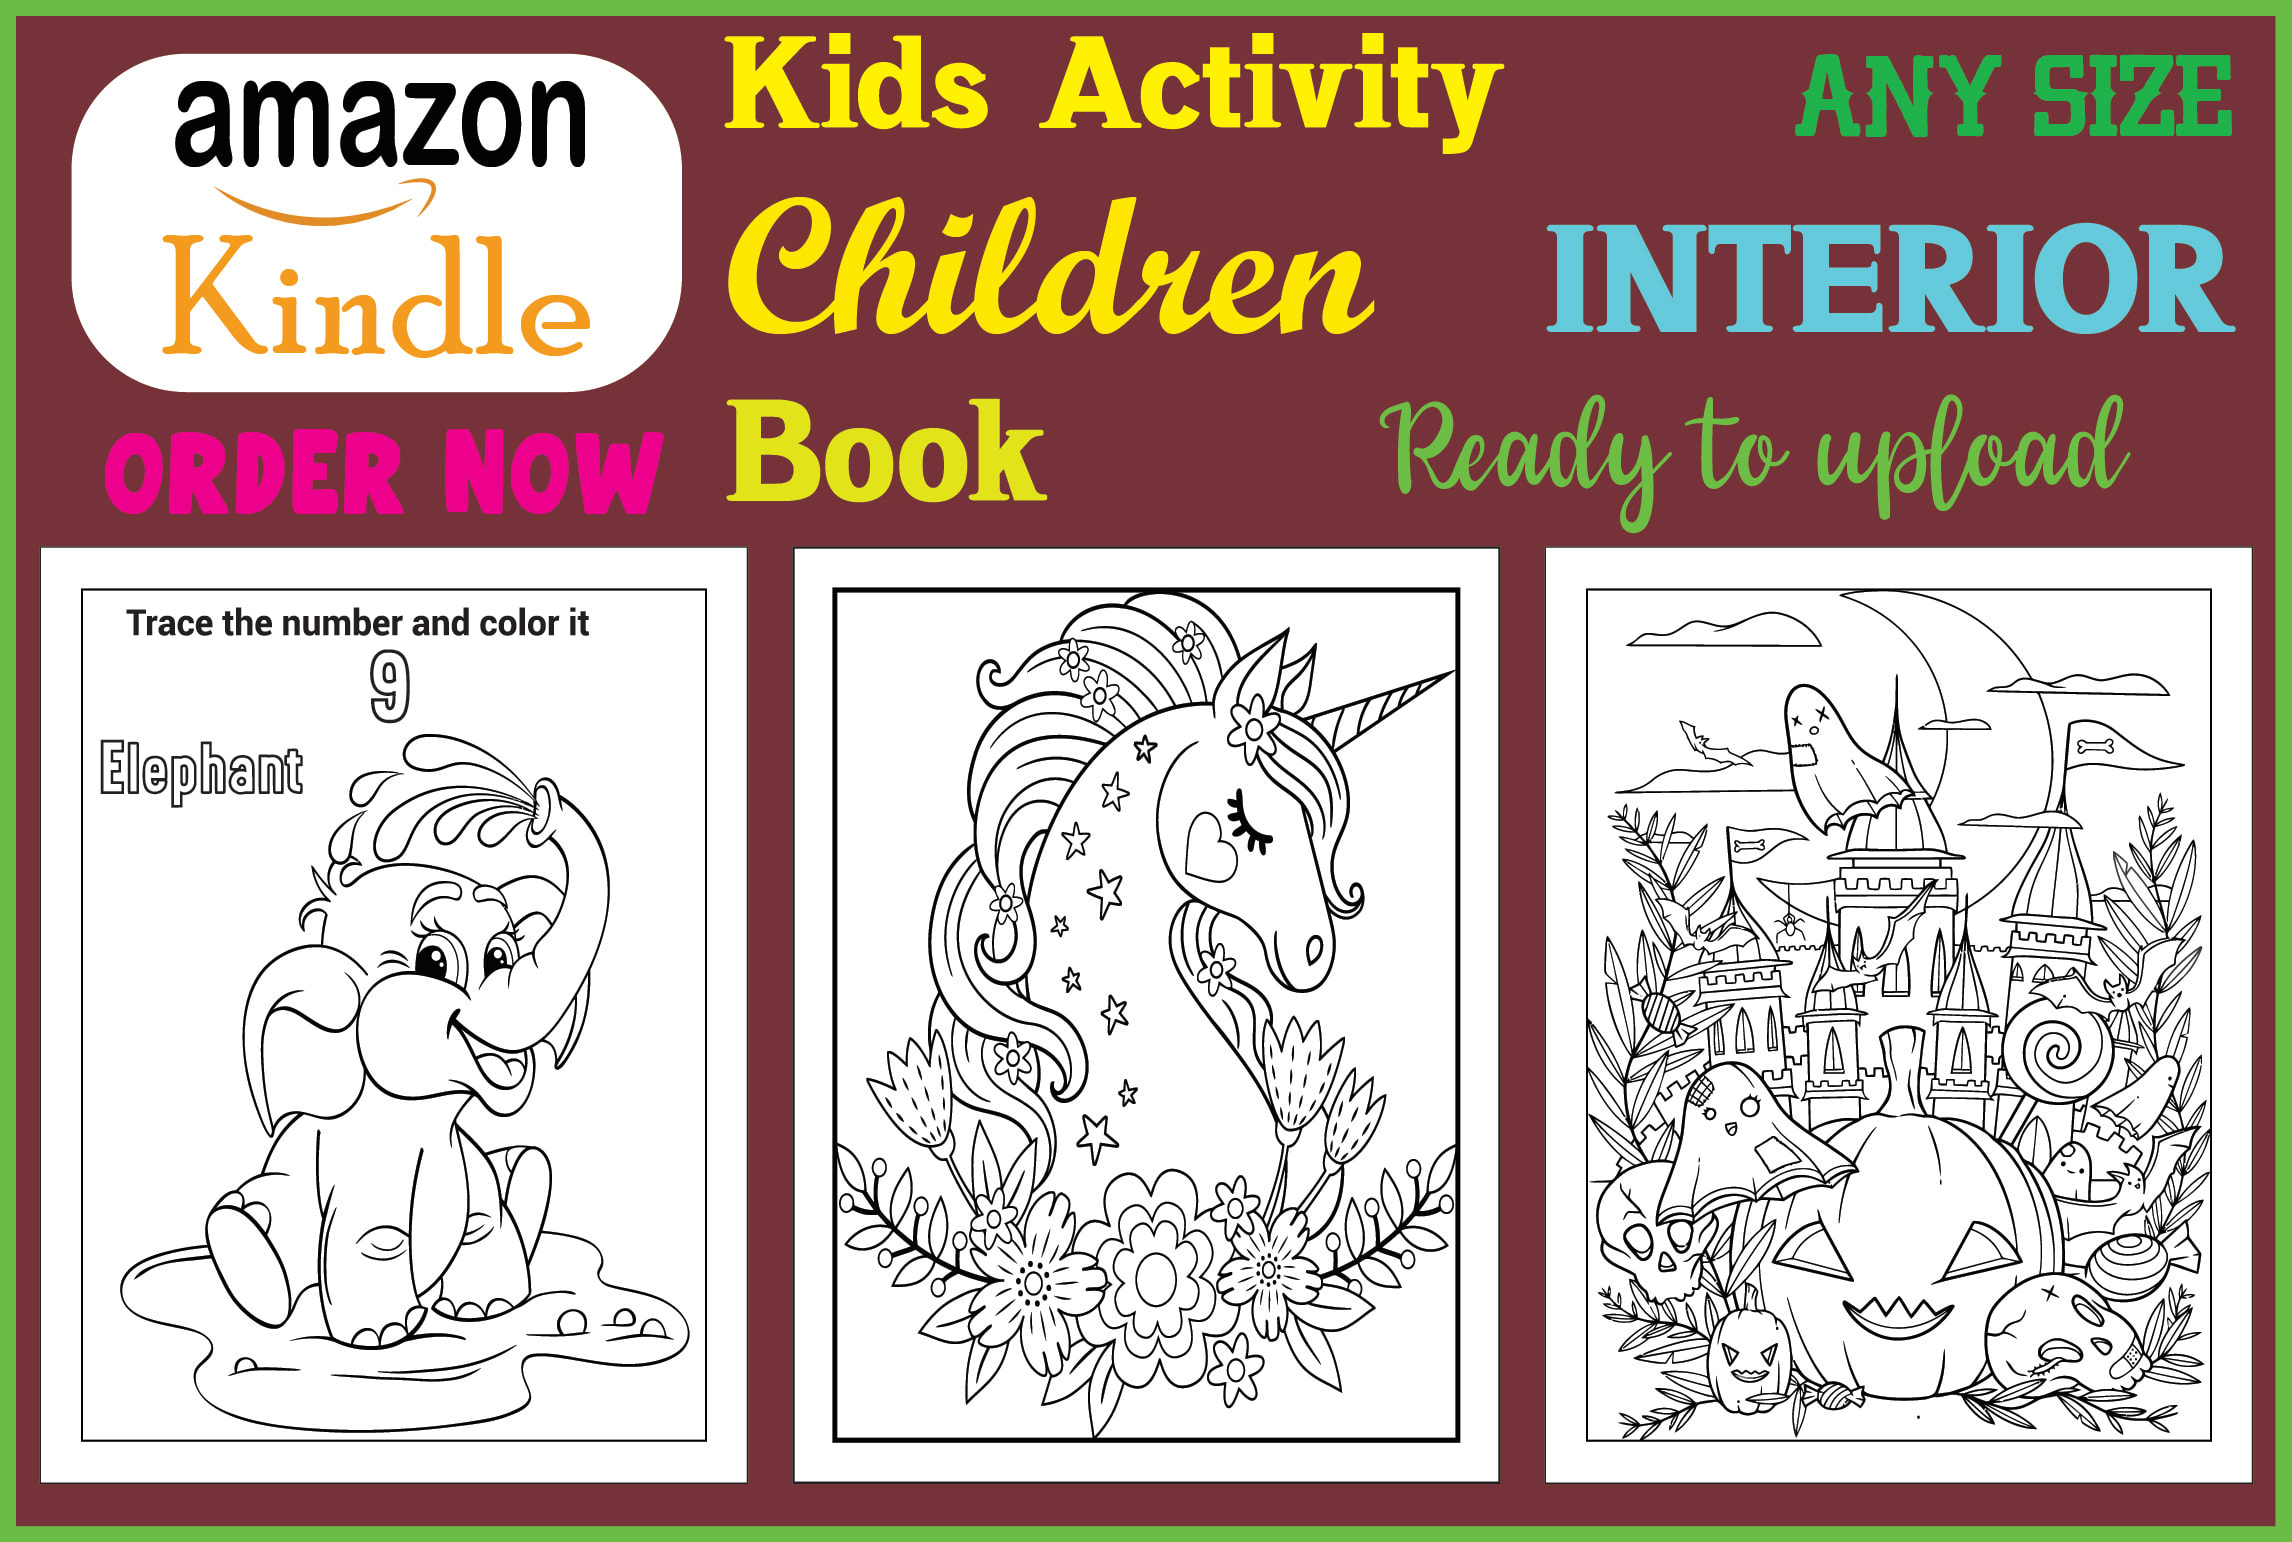 III. Getting Started with Amazon Kindle Direct Publishing for Coloring Books